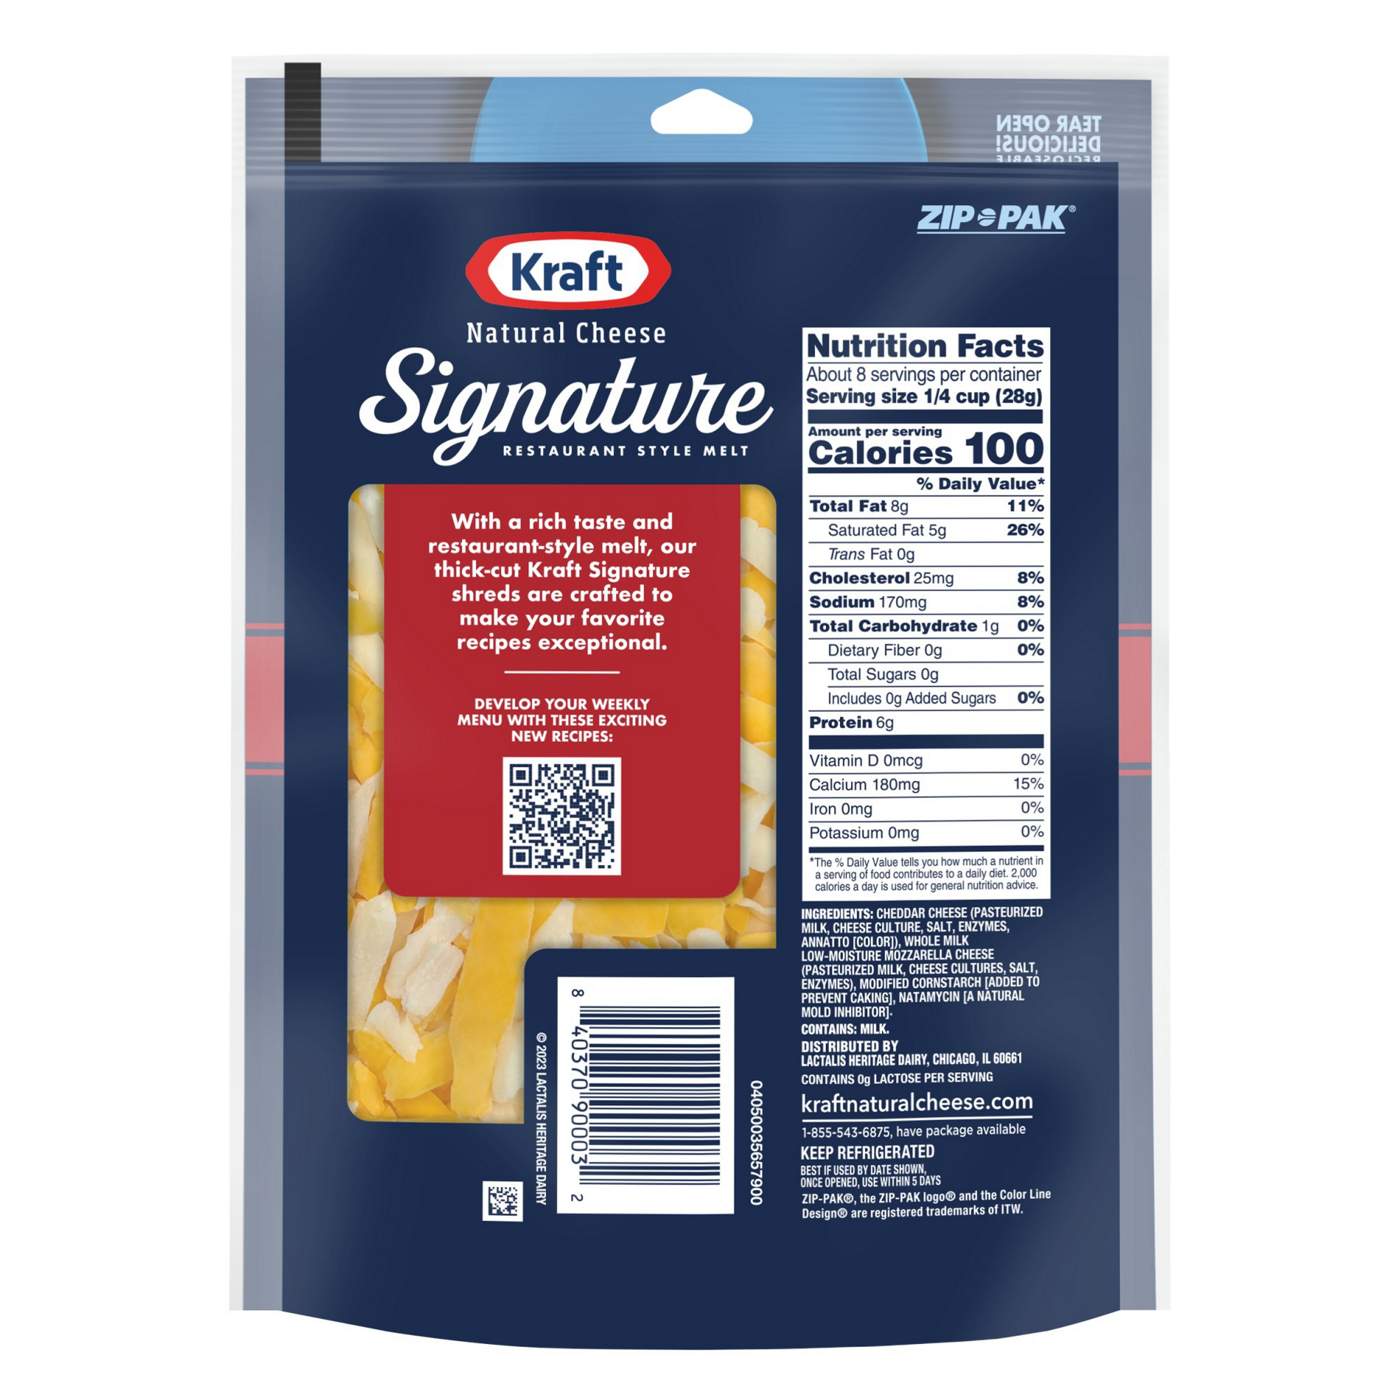 Kraft Signature Restaurant Style Melt Cheddar Shredded Cheese Blend, Thick Cut; image 2 of 2